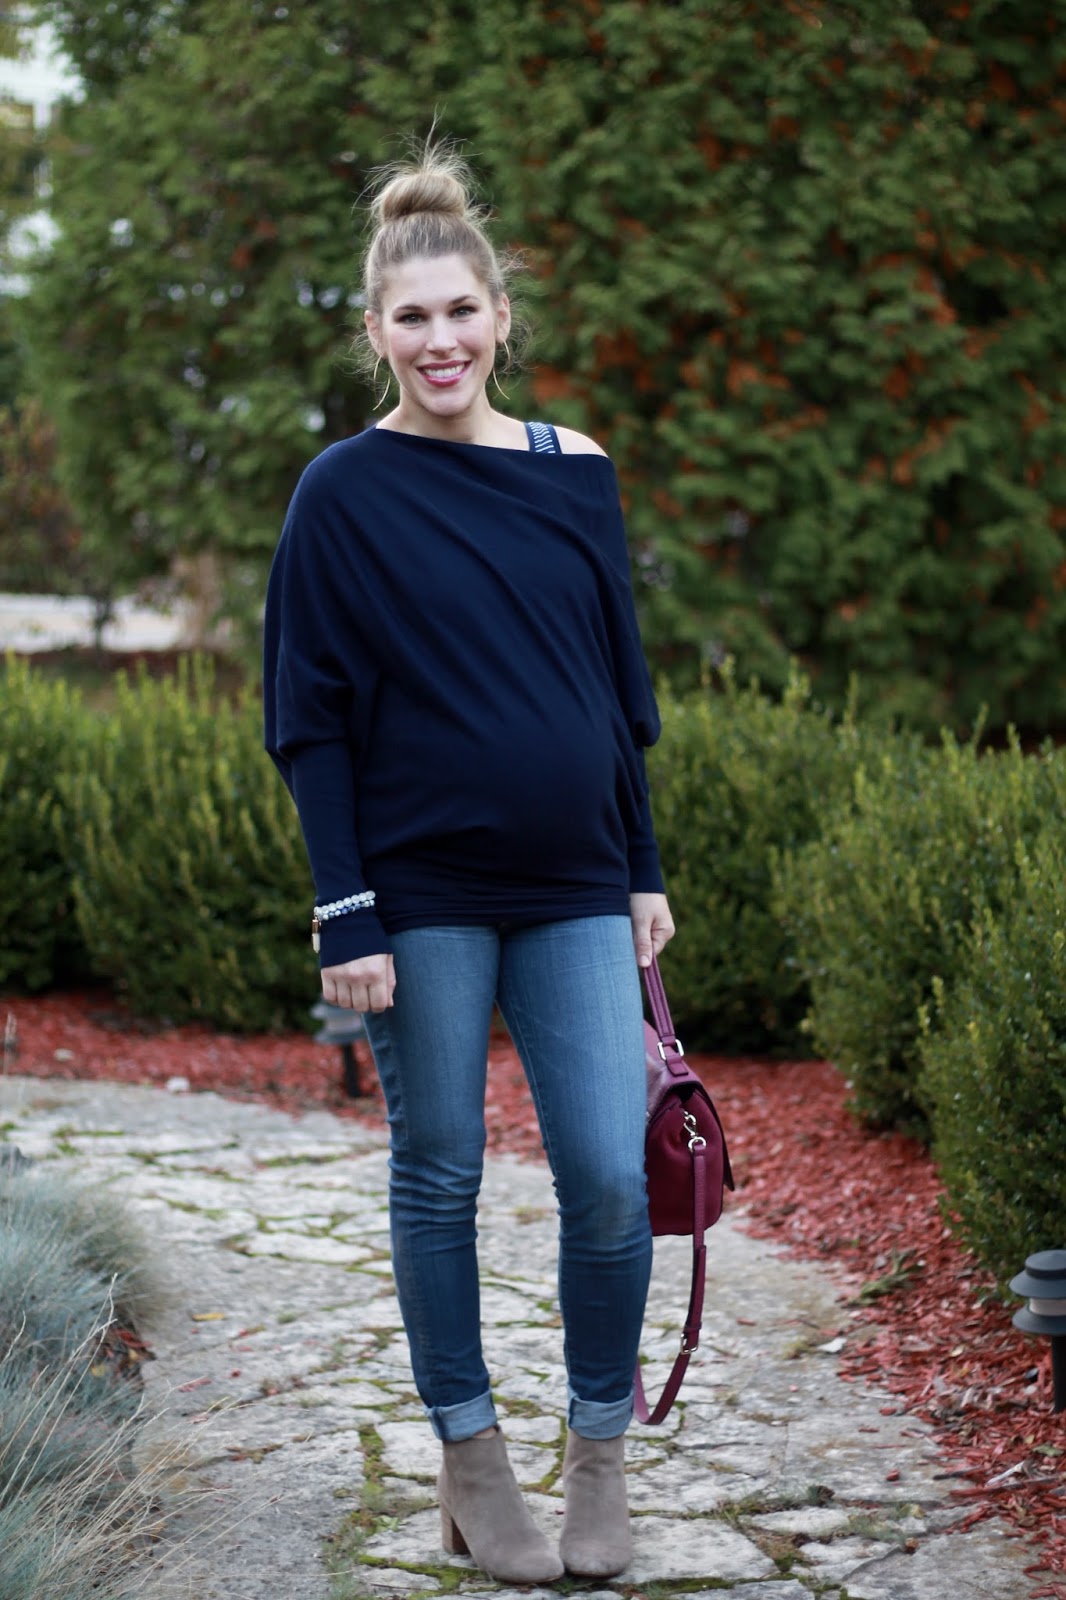 The Cutest Fall Sweater & Confident Twosday Linkup